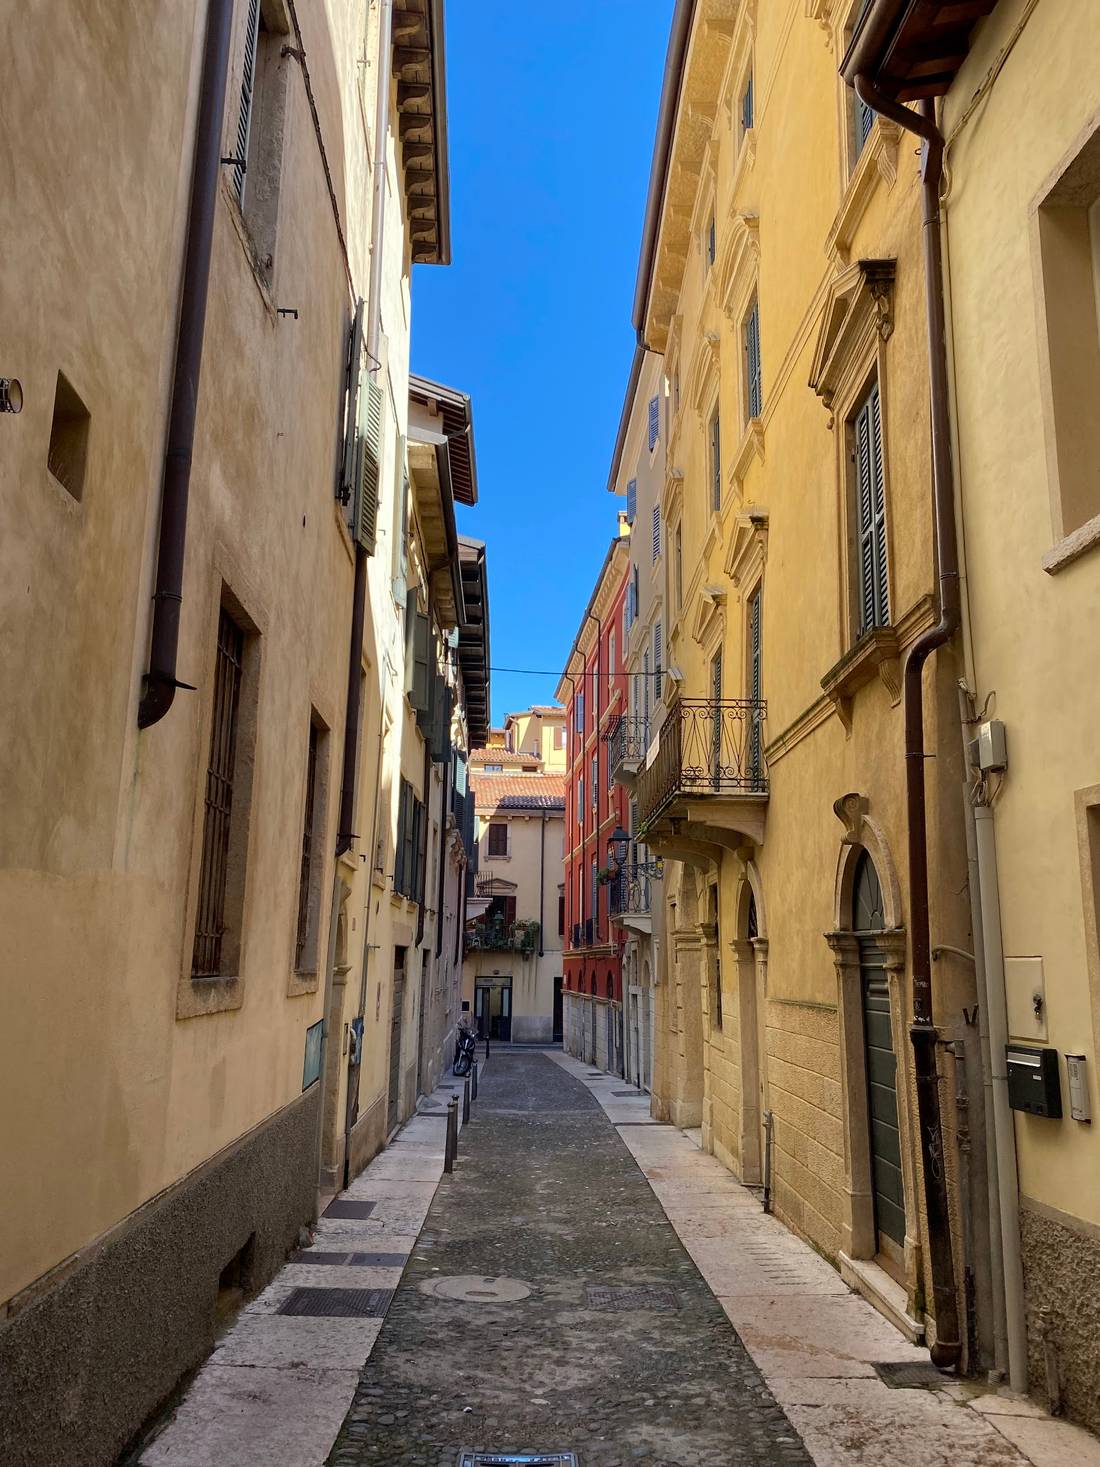 Walking on the old streets of Verona is like time travel